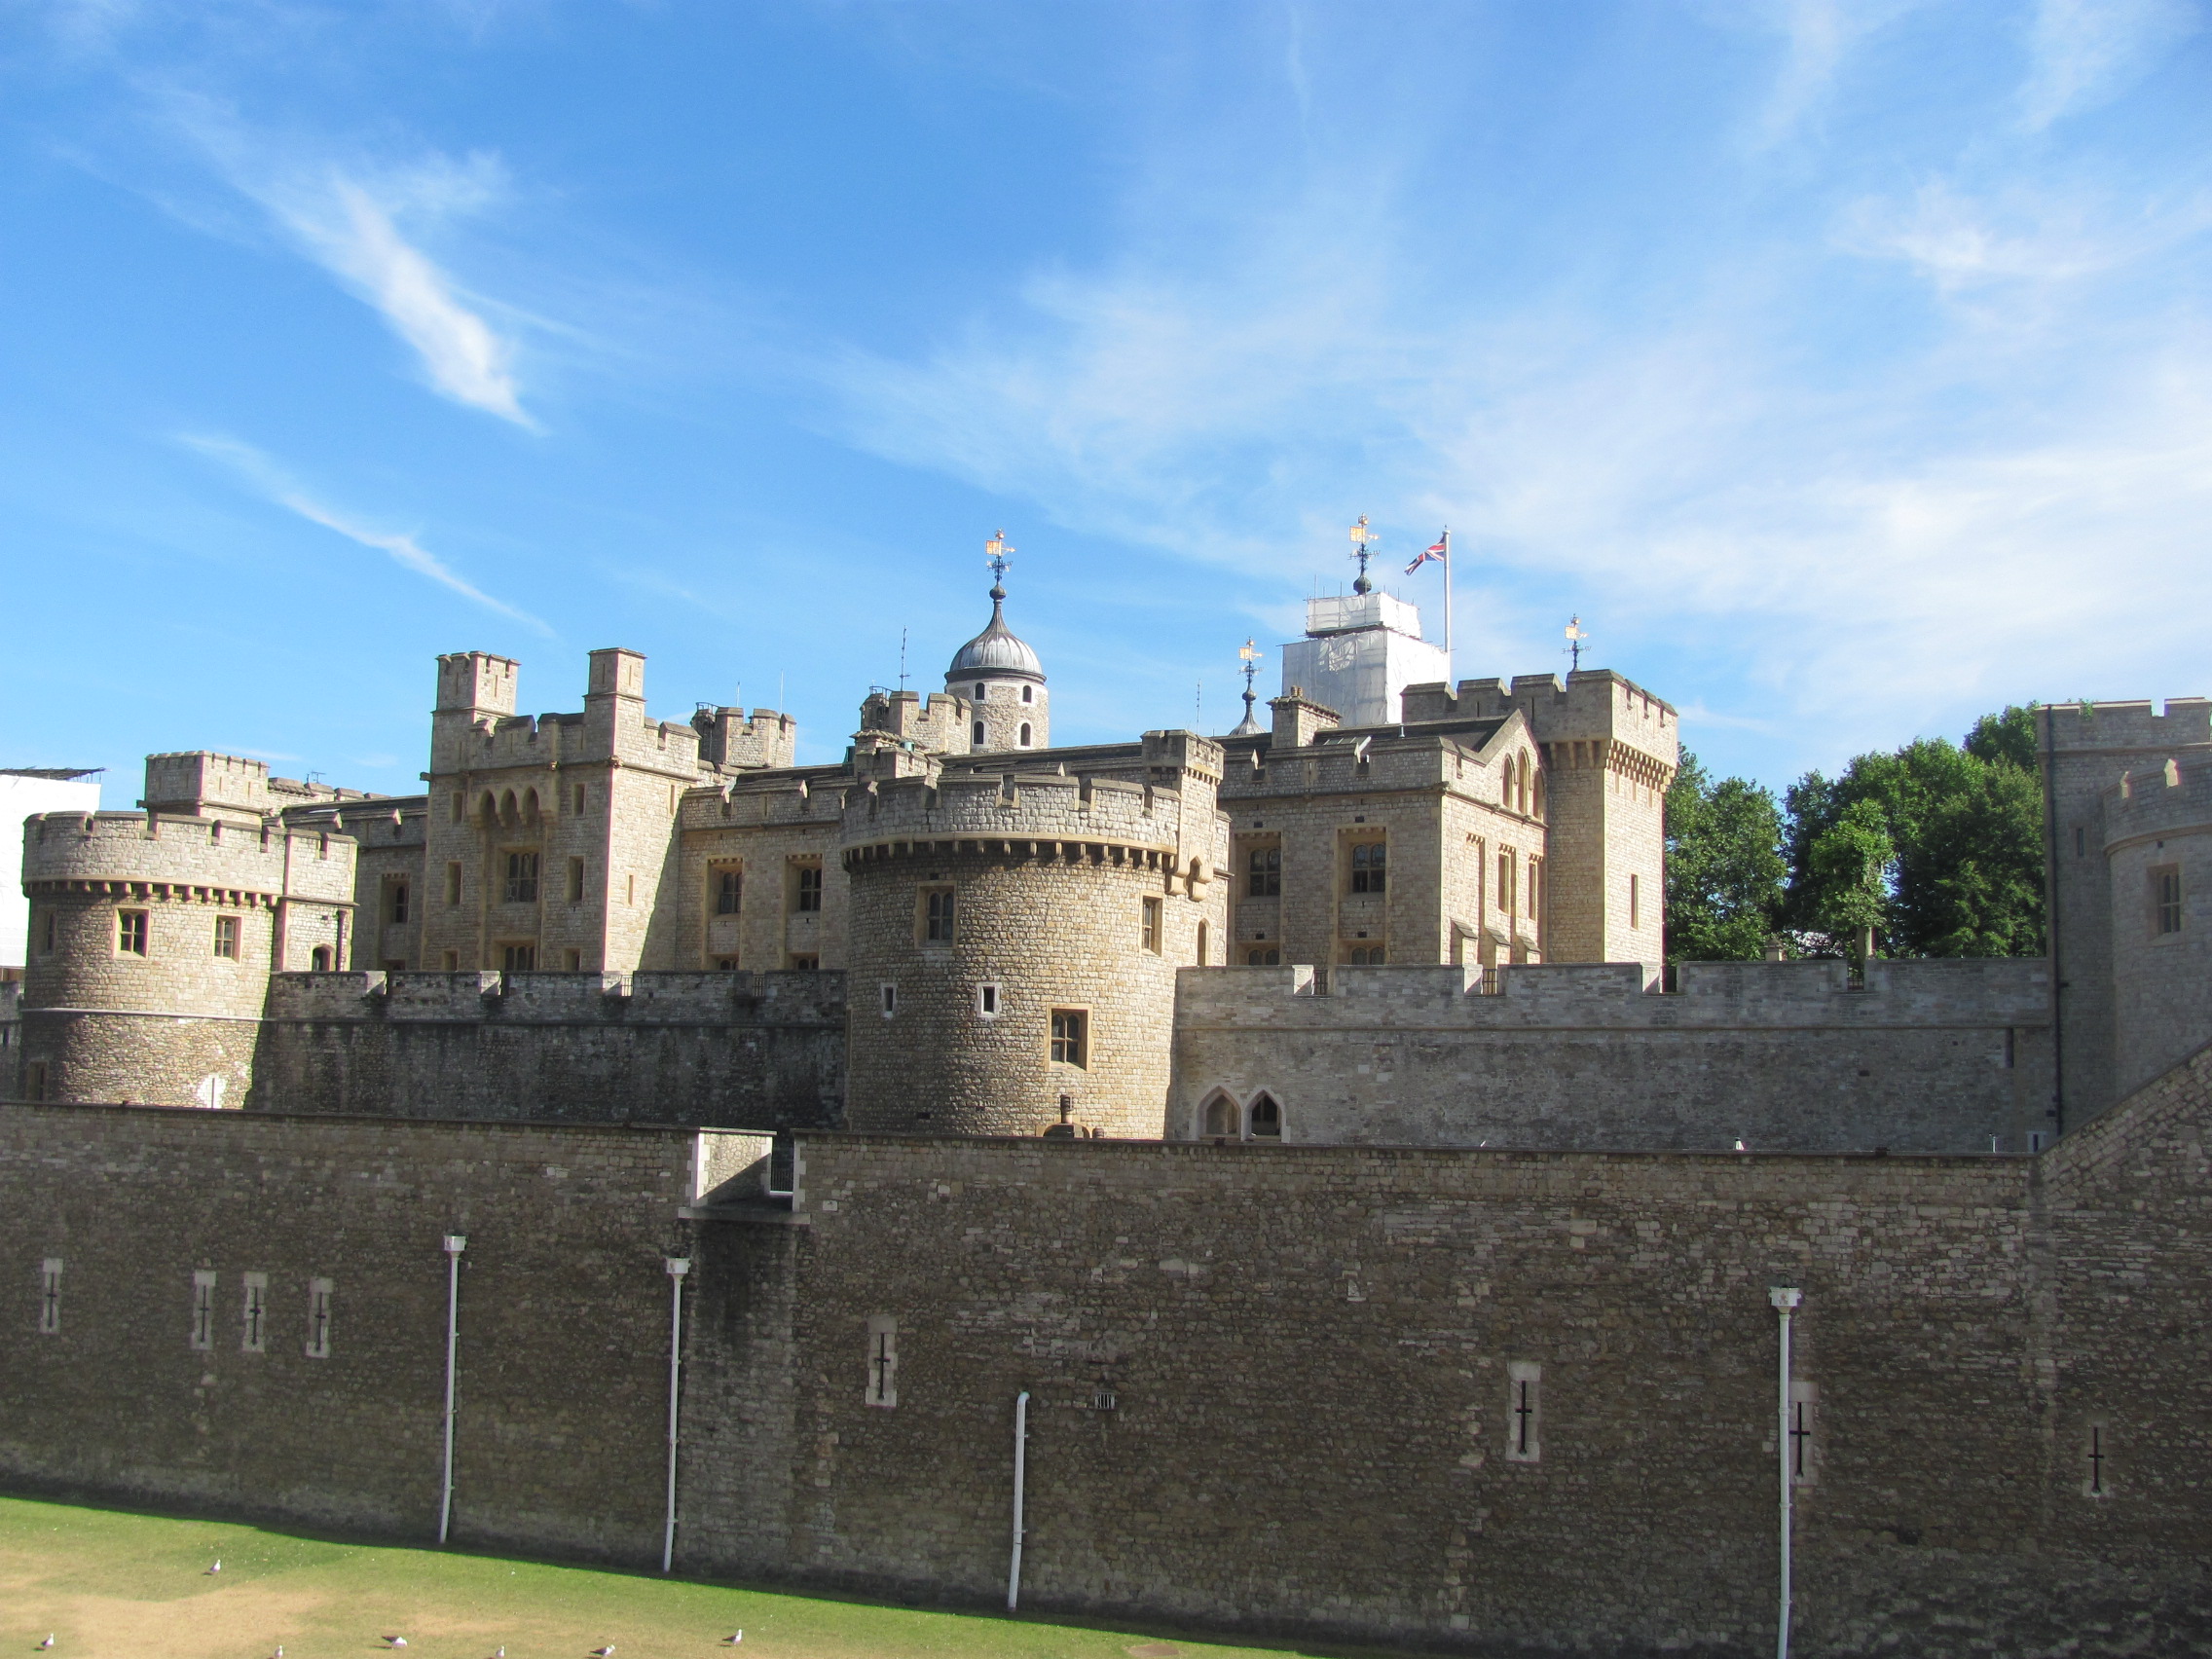 Bus Tours to Tower of London